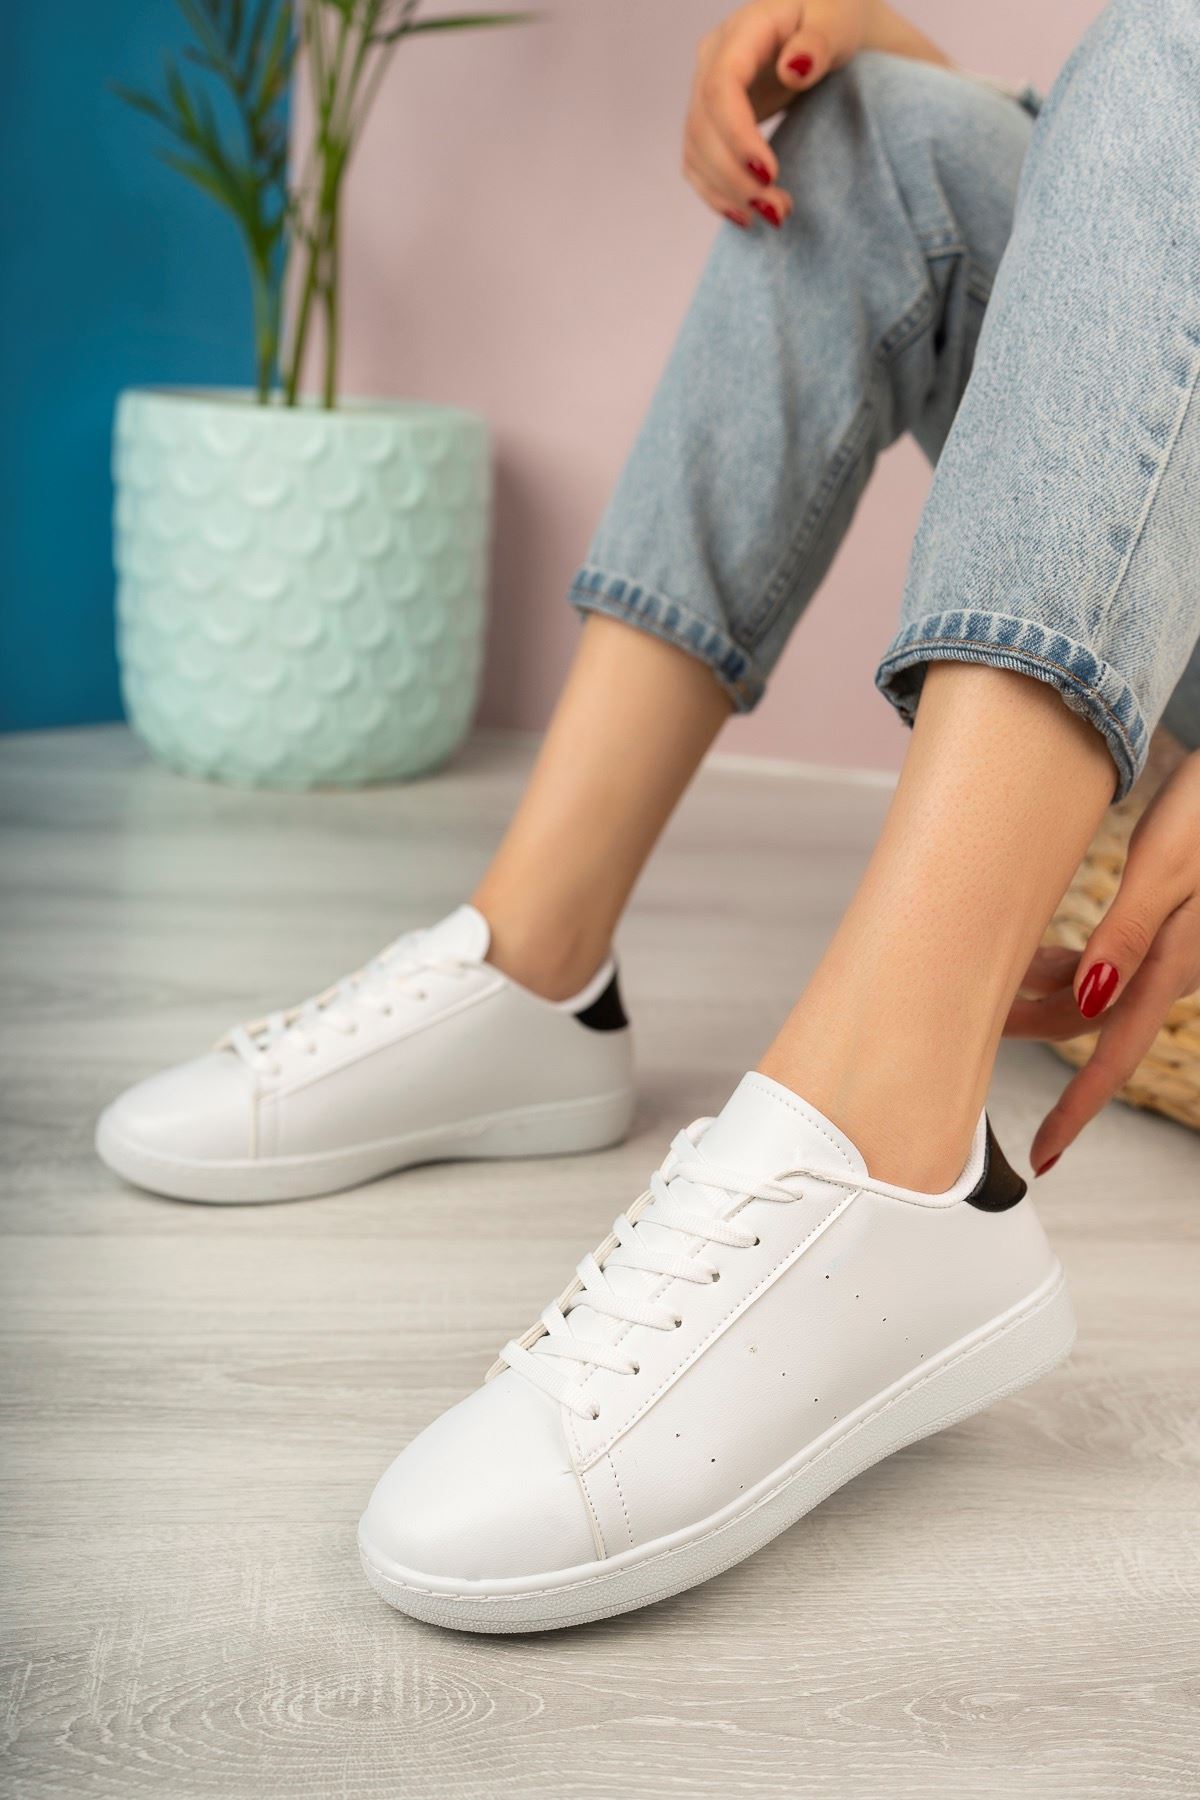 Lace-up White Women's Sneakers with Black Garnish on the Back